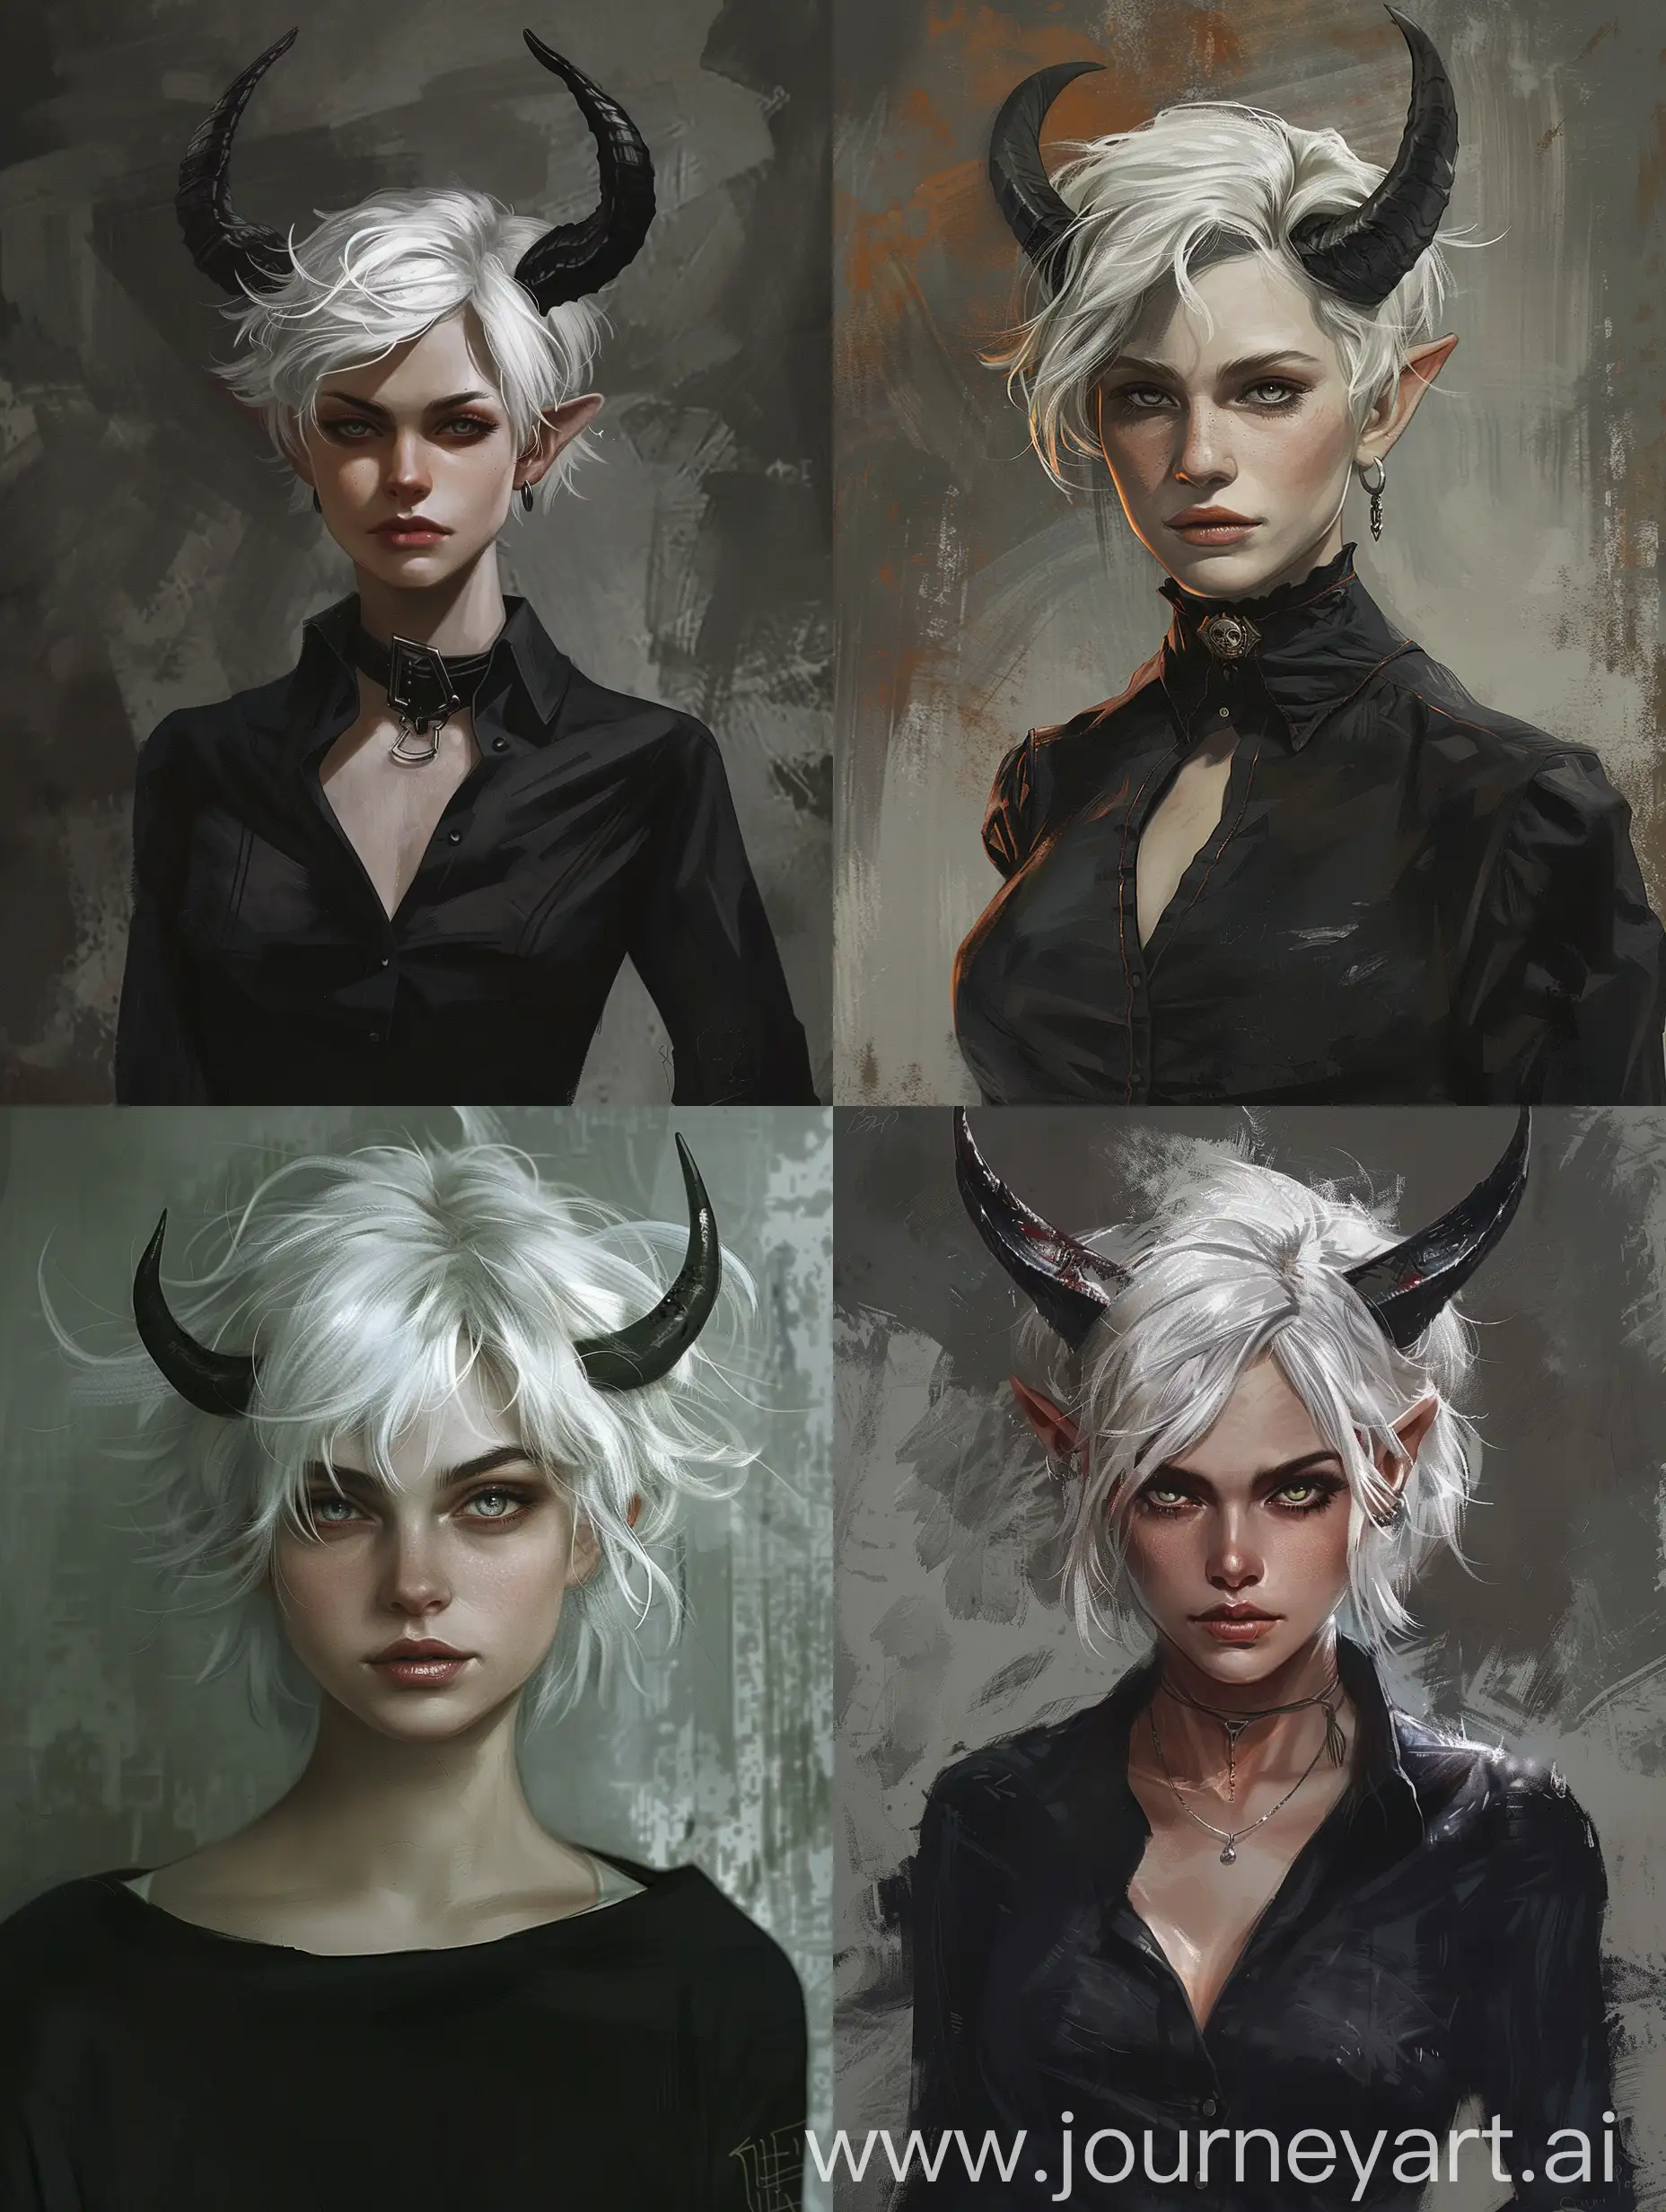 Elegant-Demon-Woman-with-White-Hair-and-Horns-Silvery-Eyes-and-Artistic-Flair